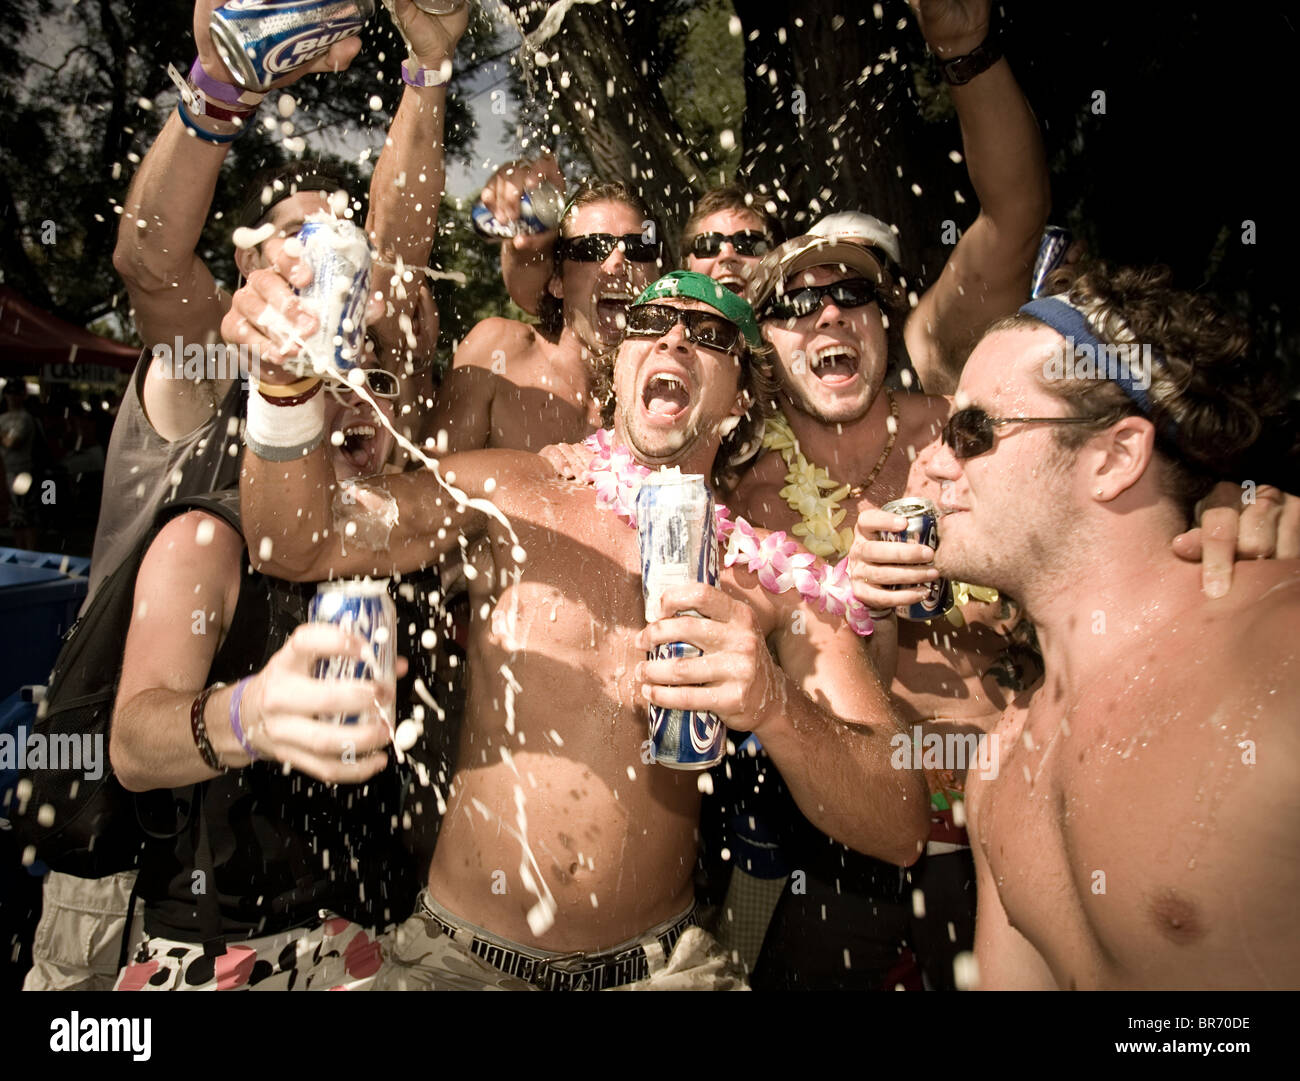 male-adults-spraying-beer-at-a-party-in-toronto-ontario-BR70DE.jpg